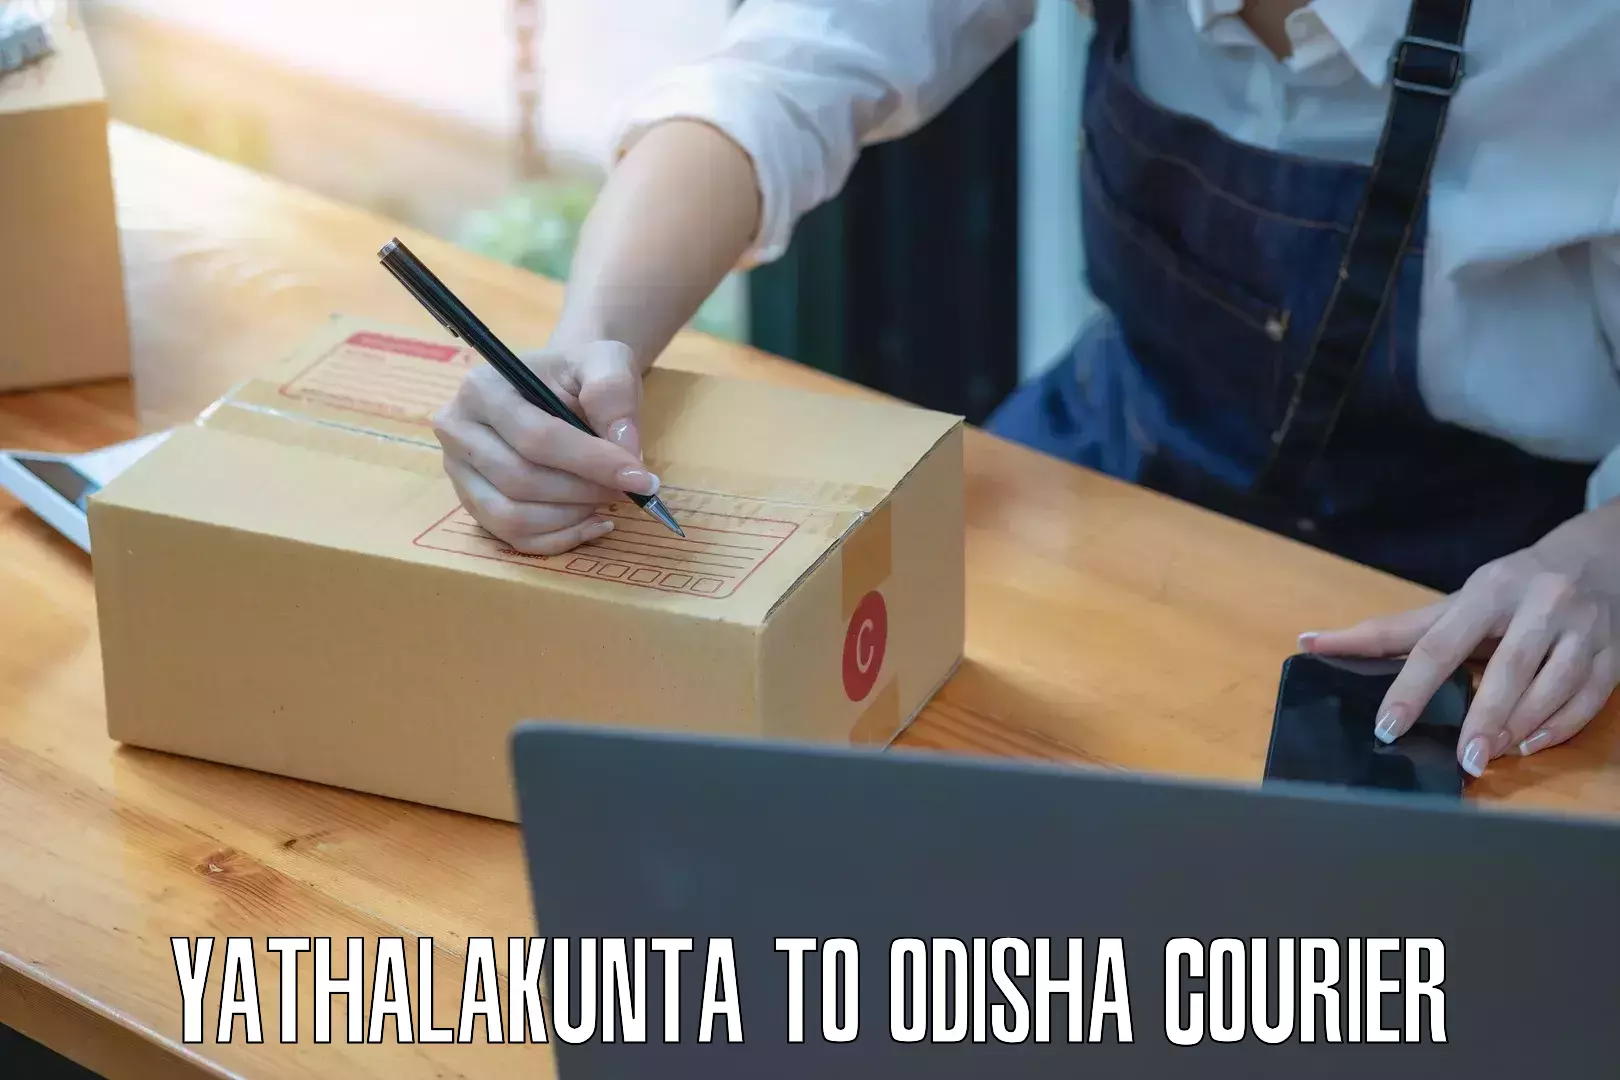 Global courier networks Yathalakunta to Sinapali